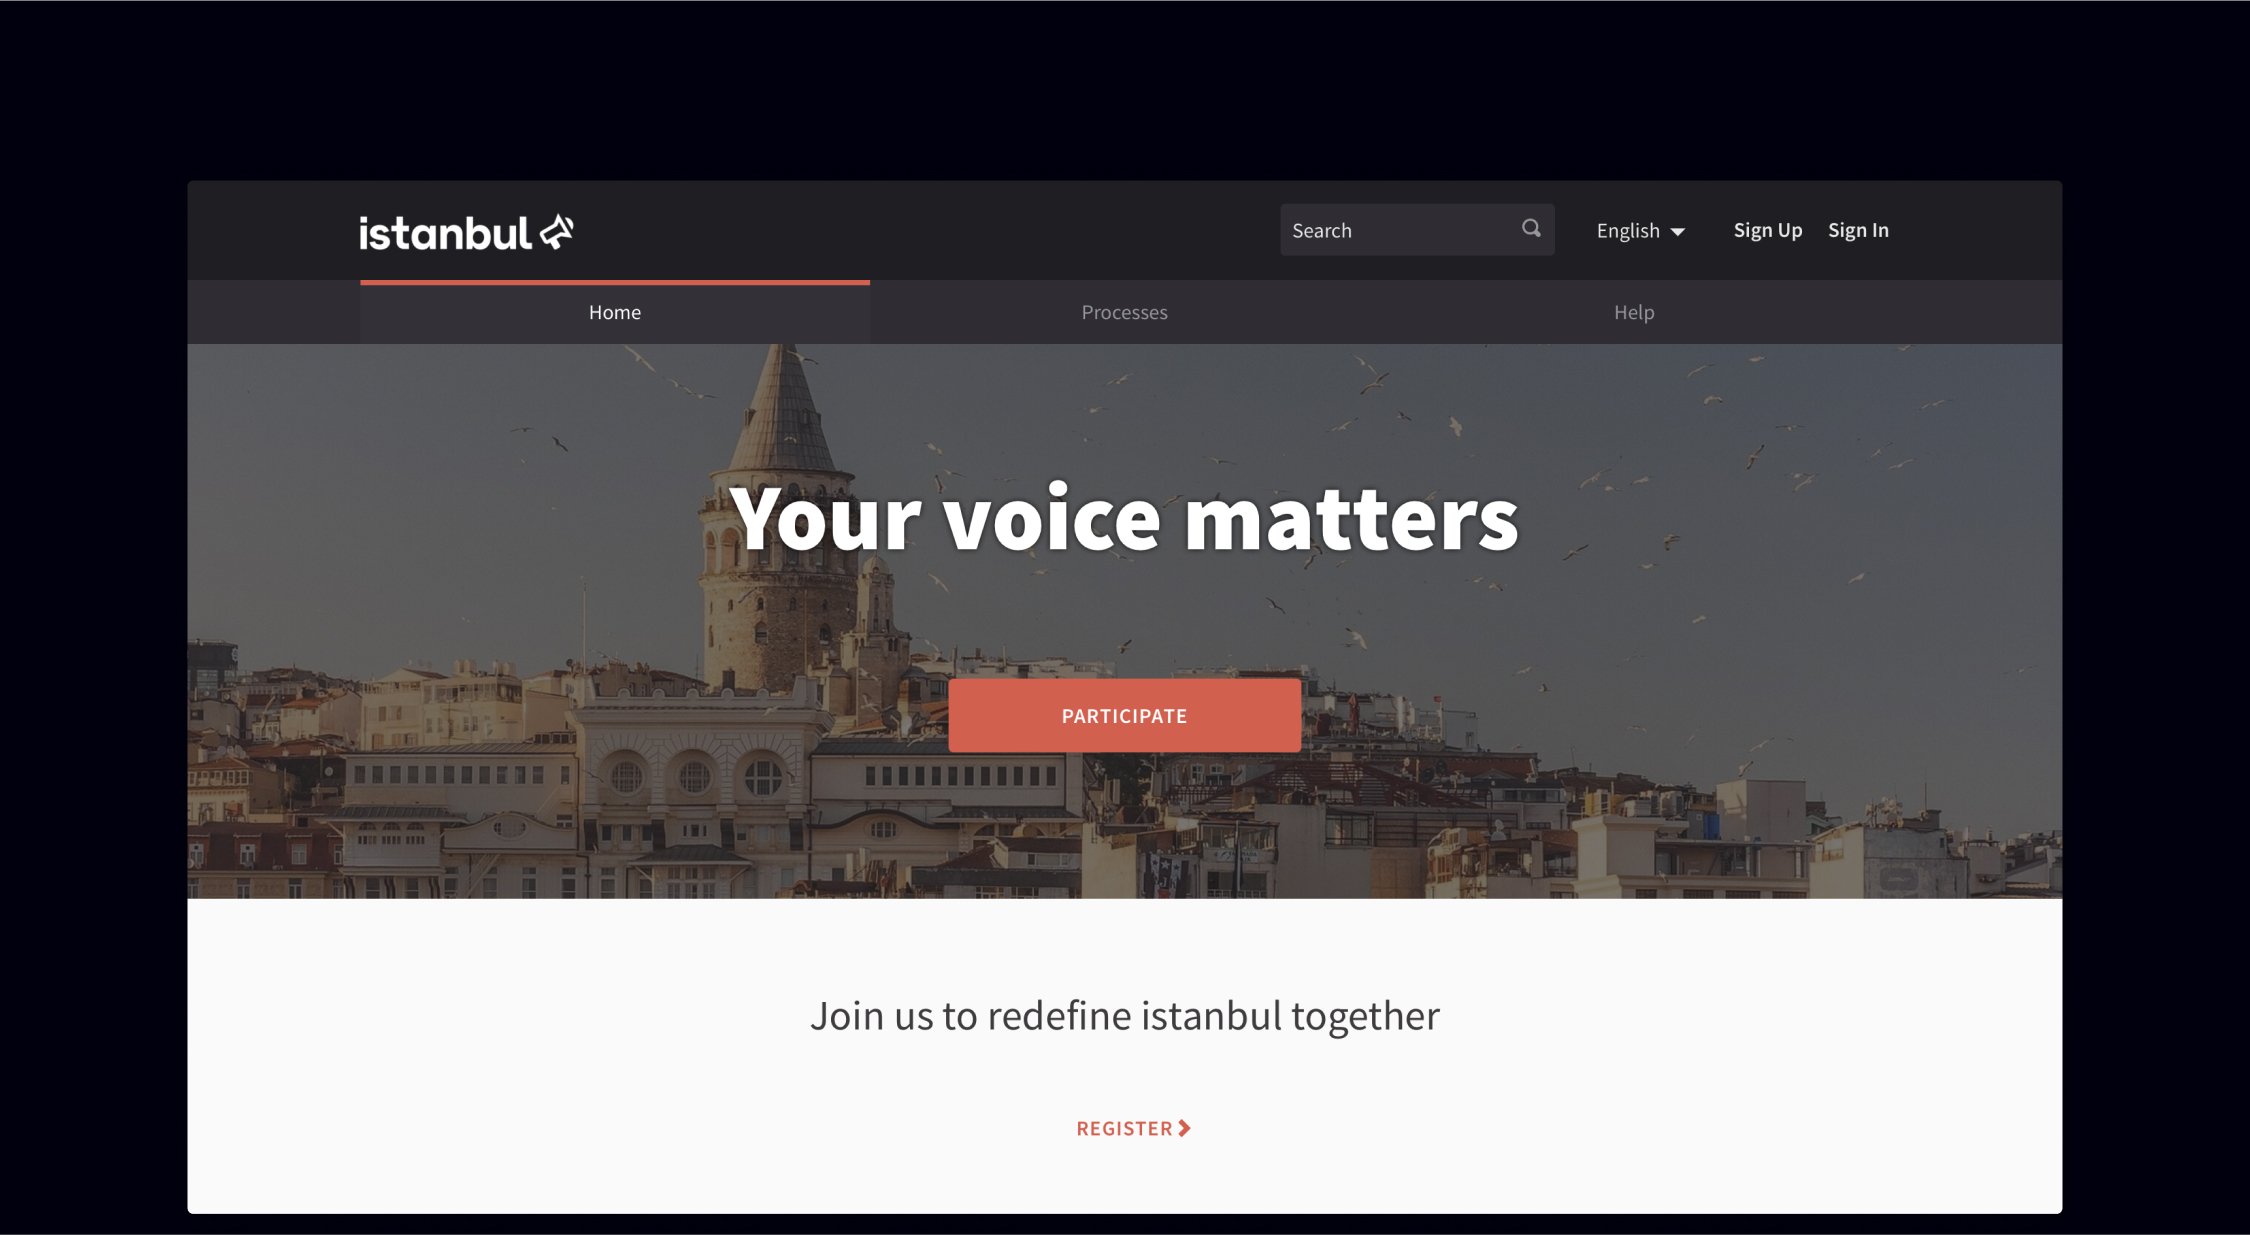 Voca enables the deployment of decidim in an easy and stable way to setup your participatory democracy platform in minutes, no technical knowledge needed, full support.